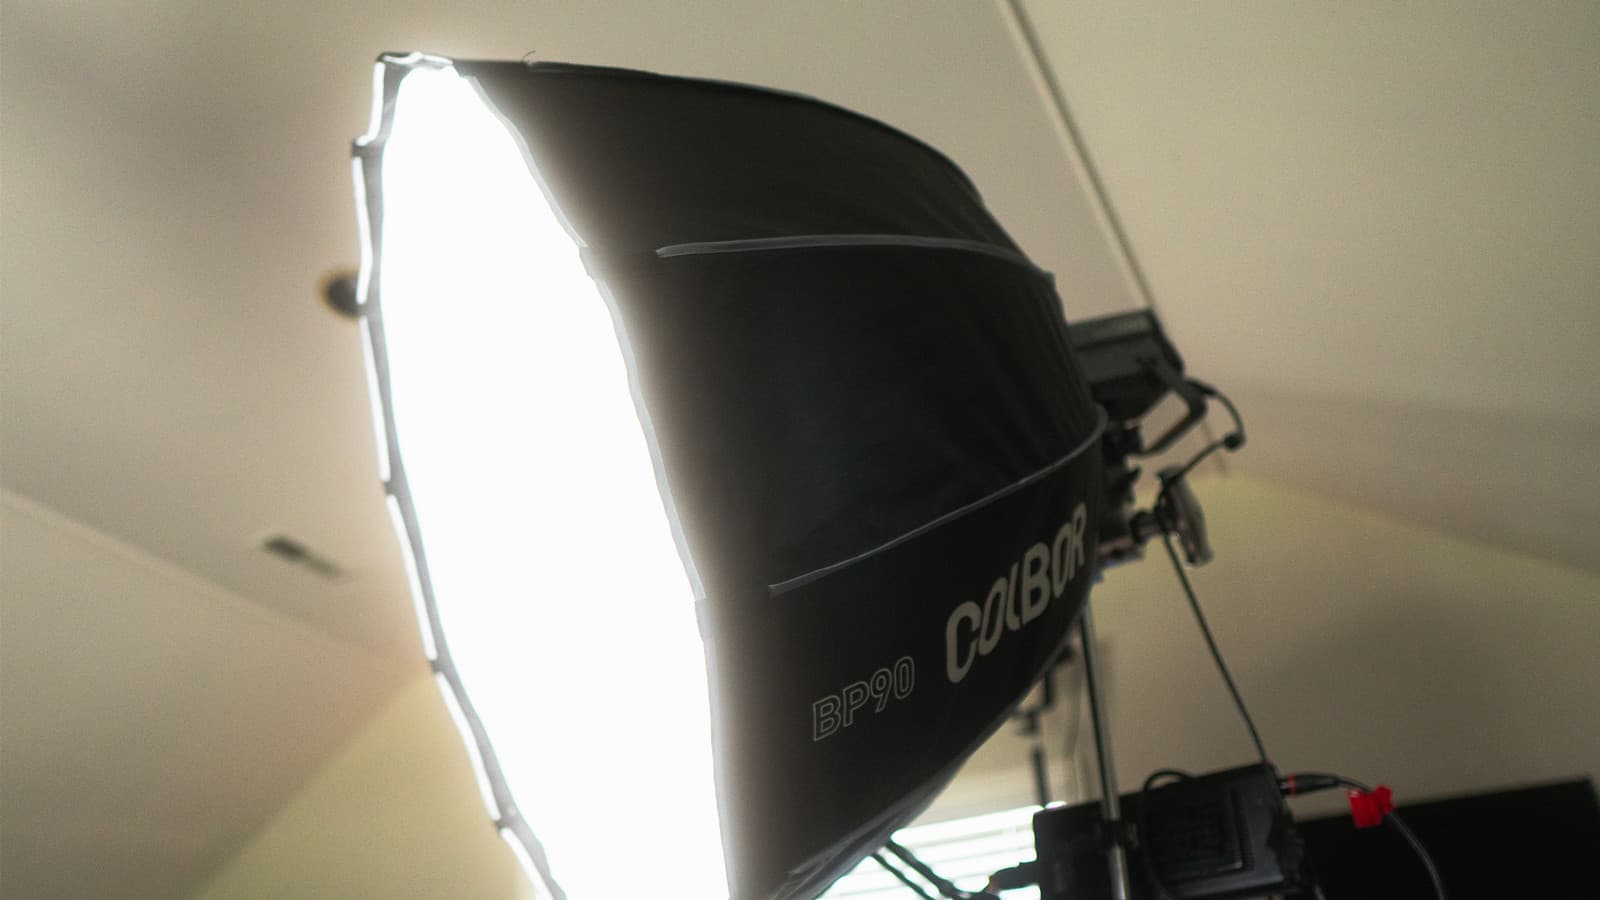 Use a softbox to soften your continuous lighting for flattering still-life photos